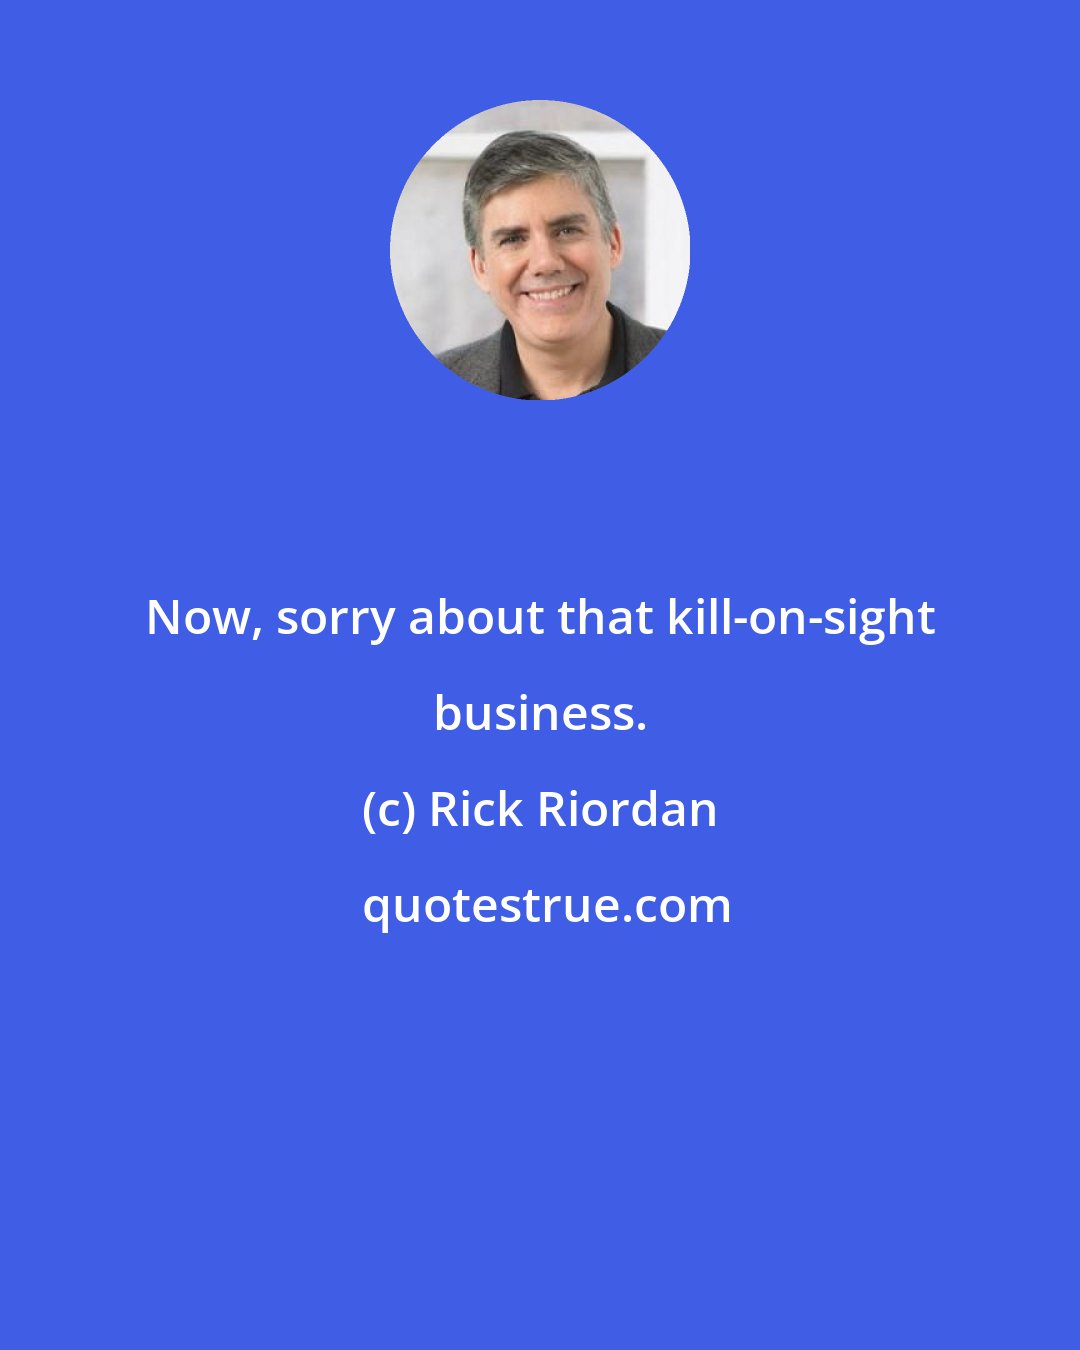 Rick Riordan: Now, sorry about that kill-on-sight business.